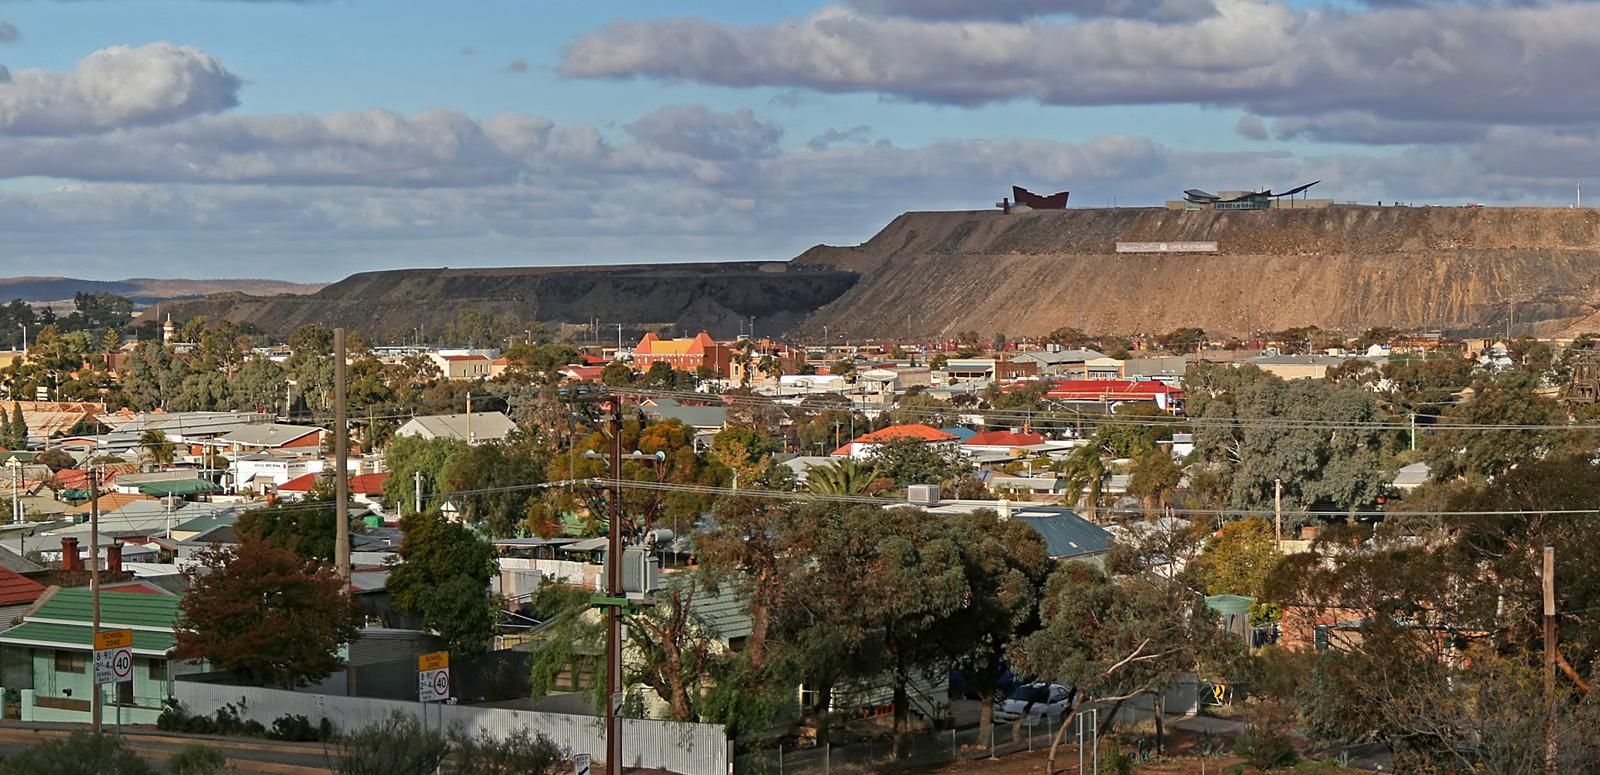 Wide angle view of the township of Broken Hill, in the distance is a mining facility.